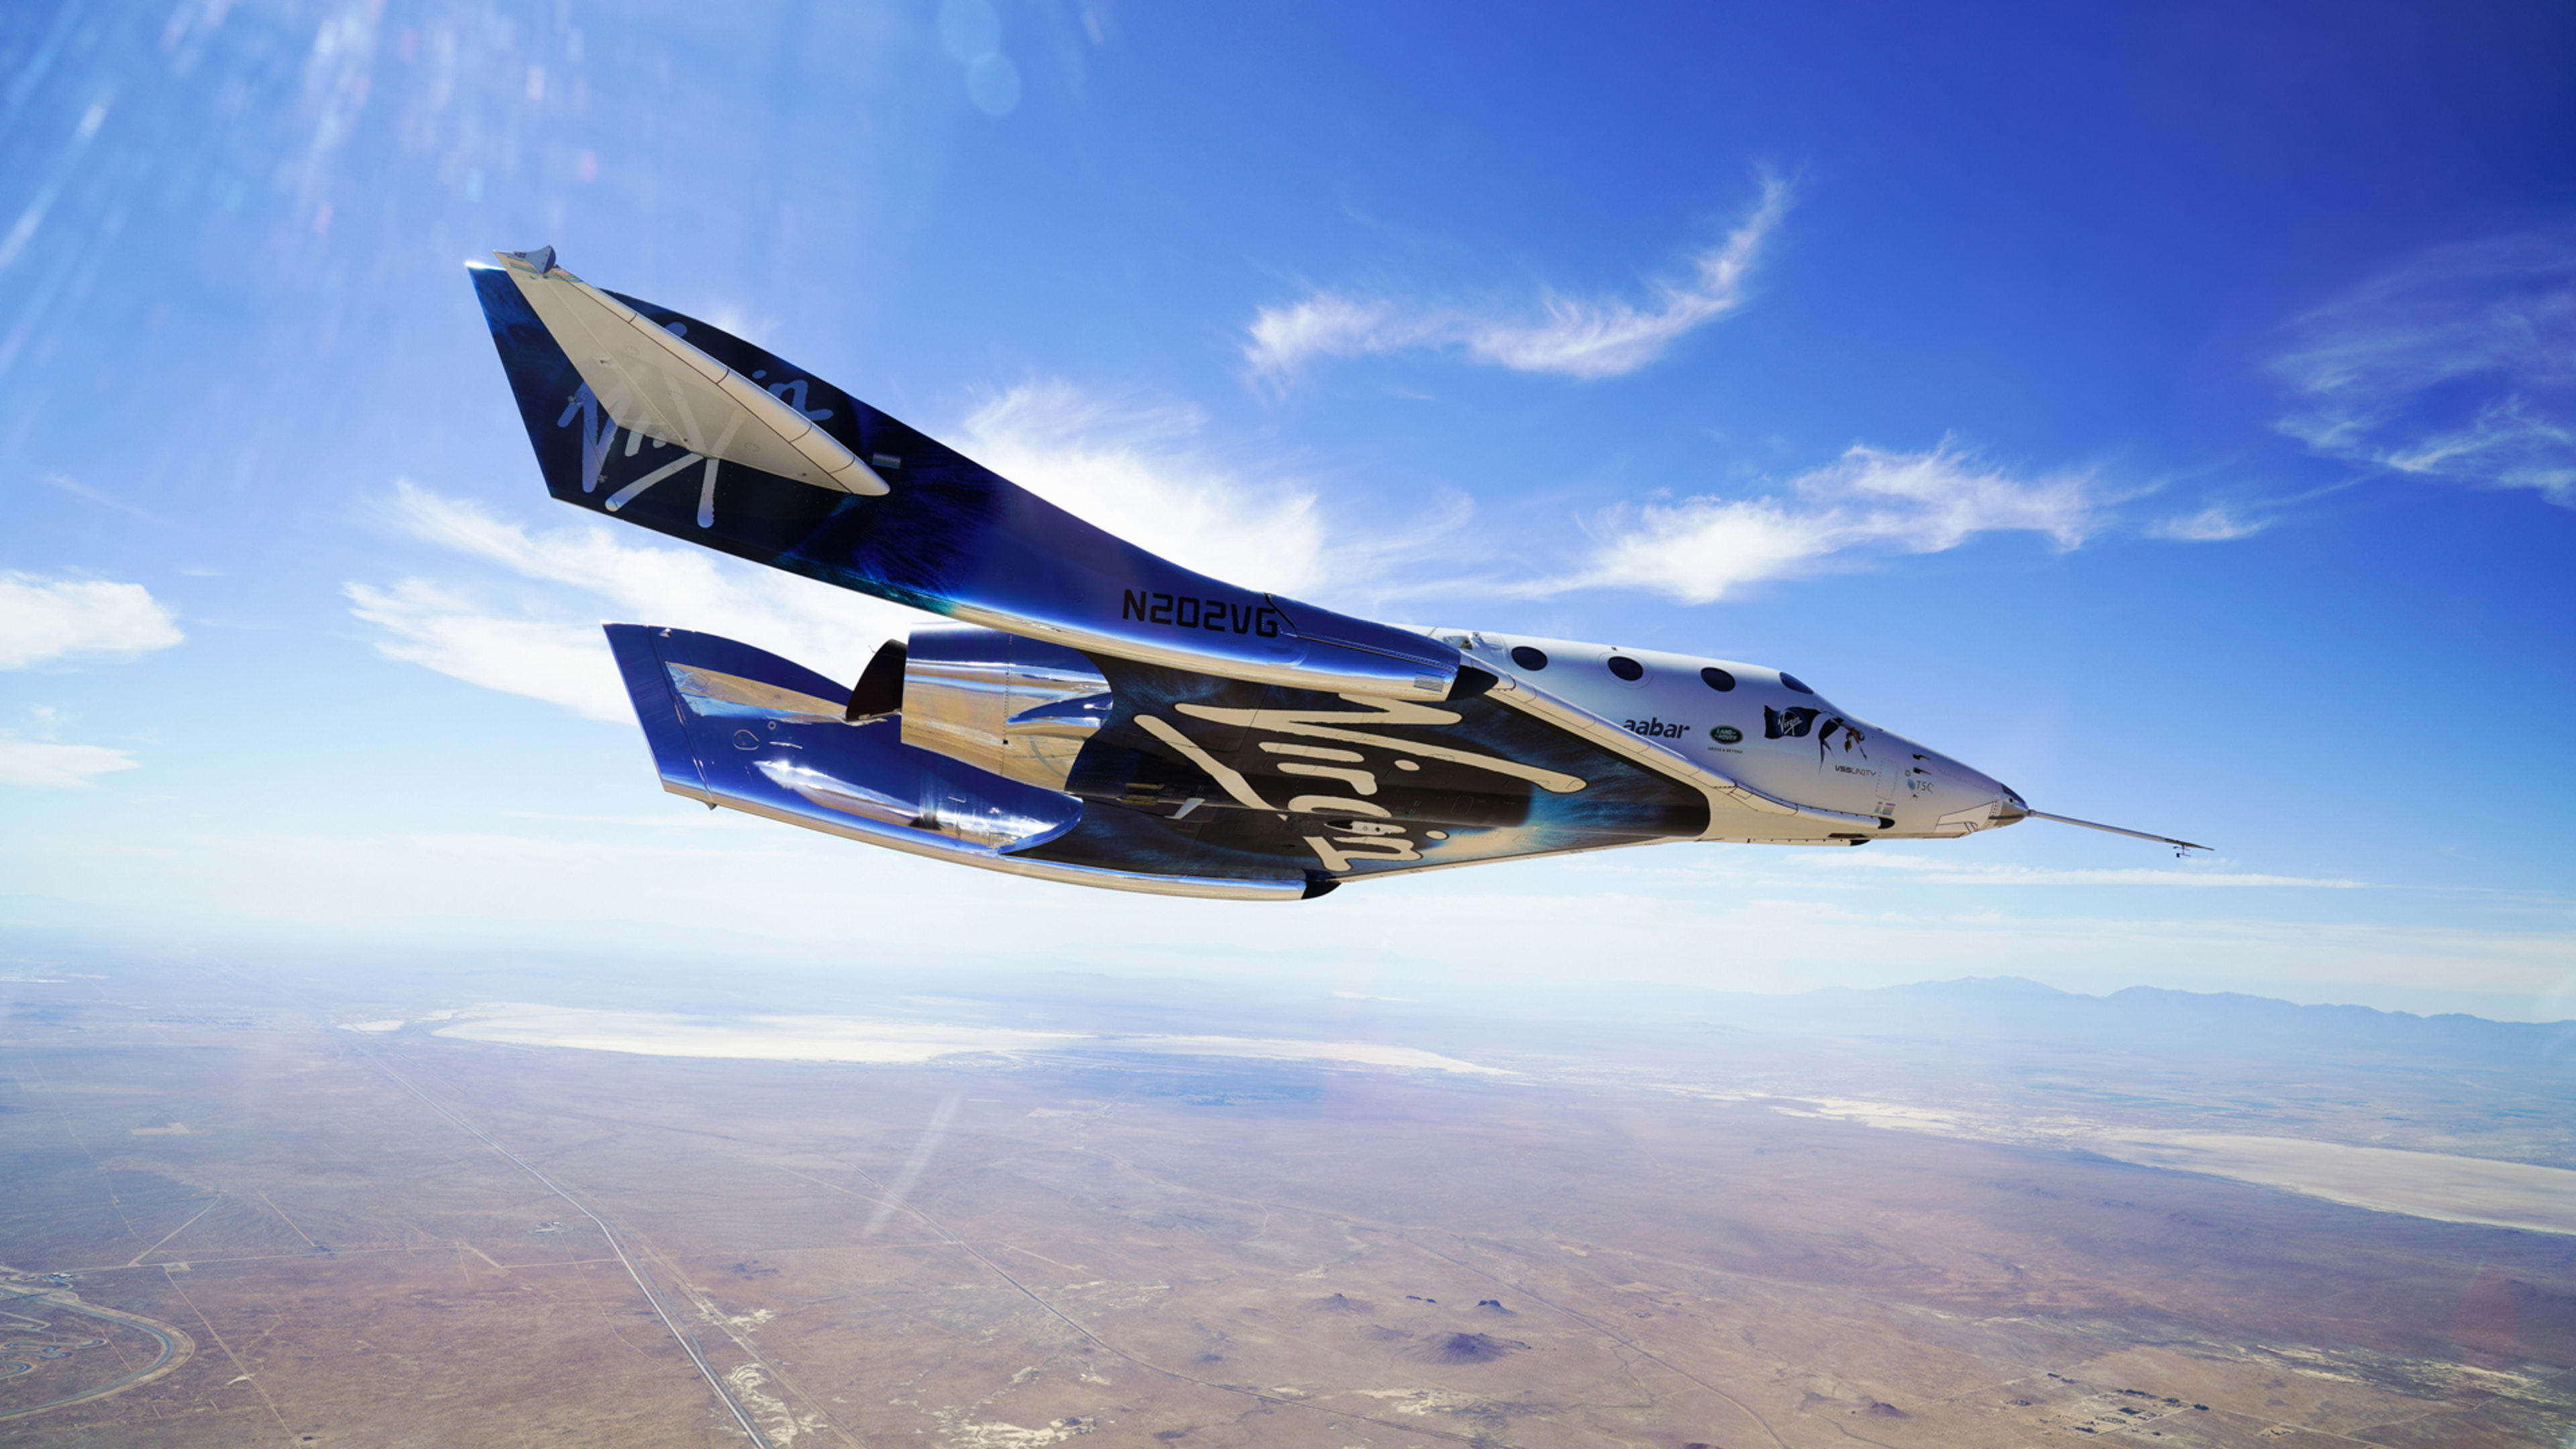 Virgin Galactic will be in space in “weeks not months,” says Branson